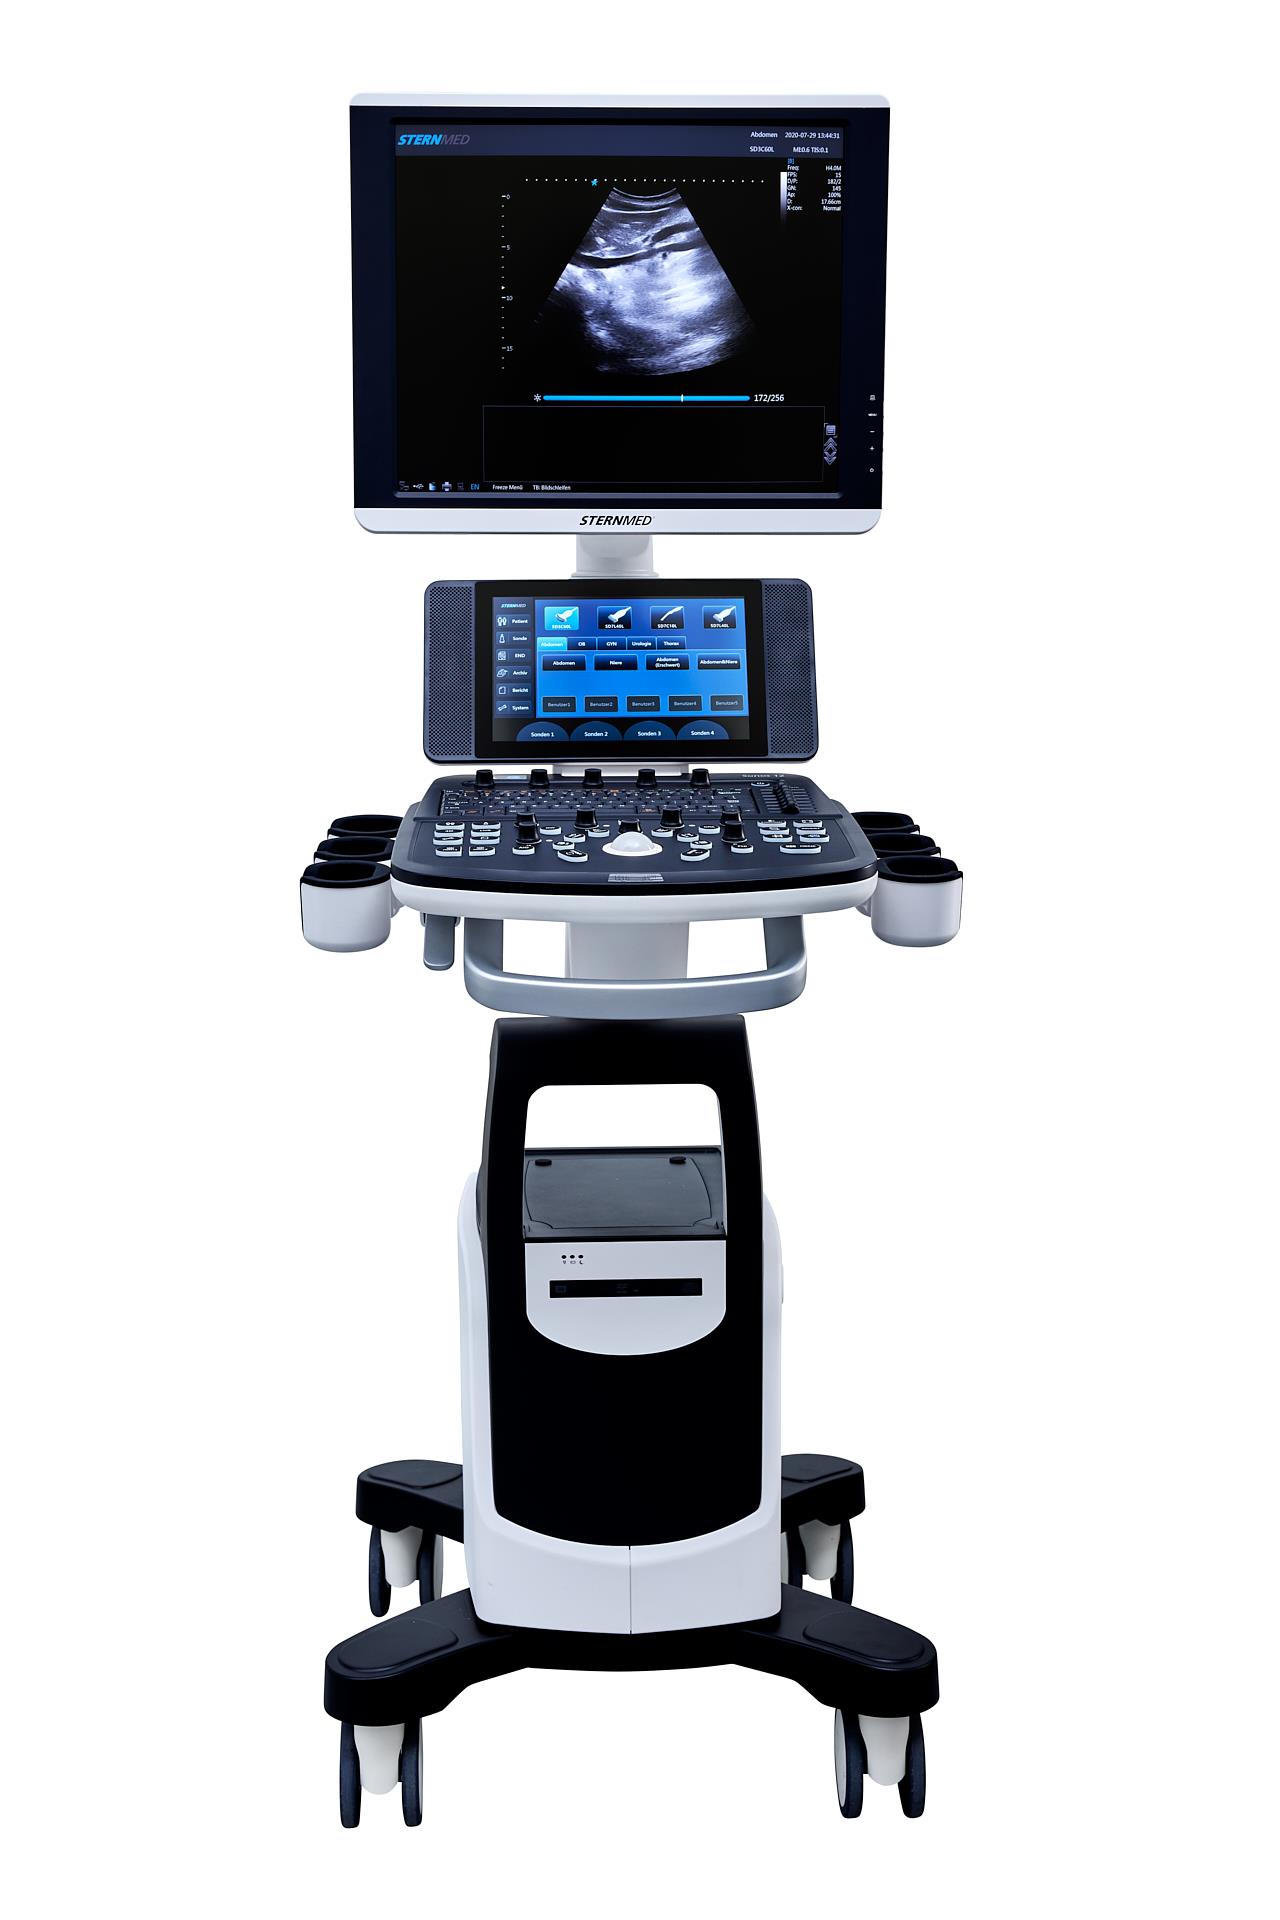 High Quality Ultrasound Systems